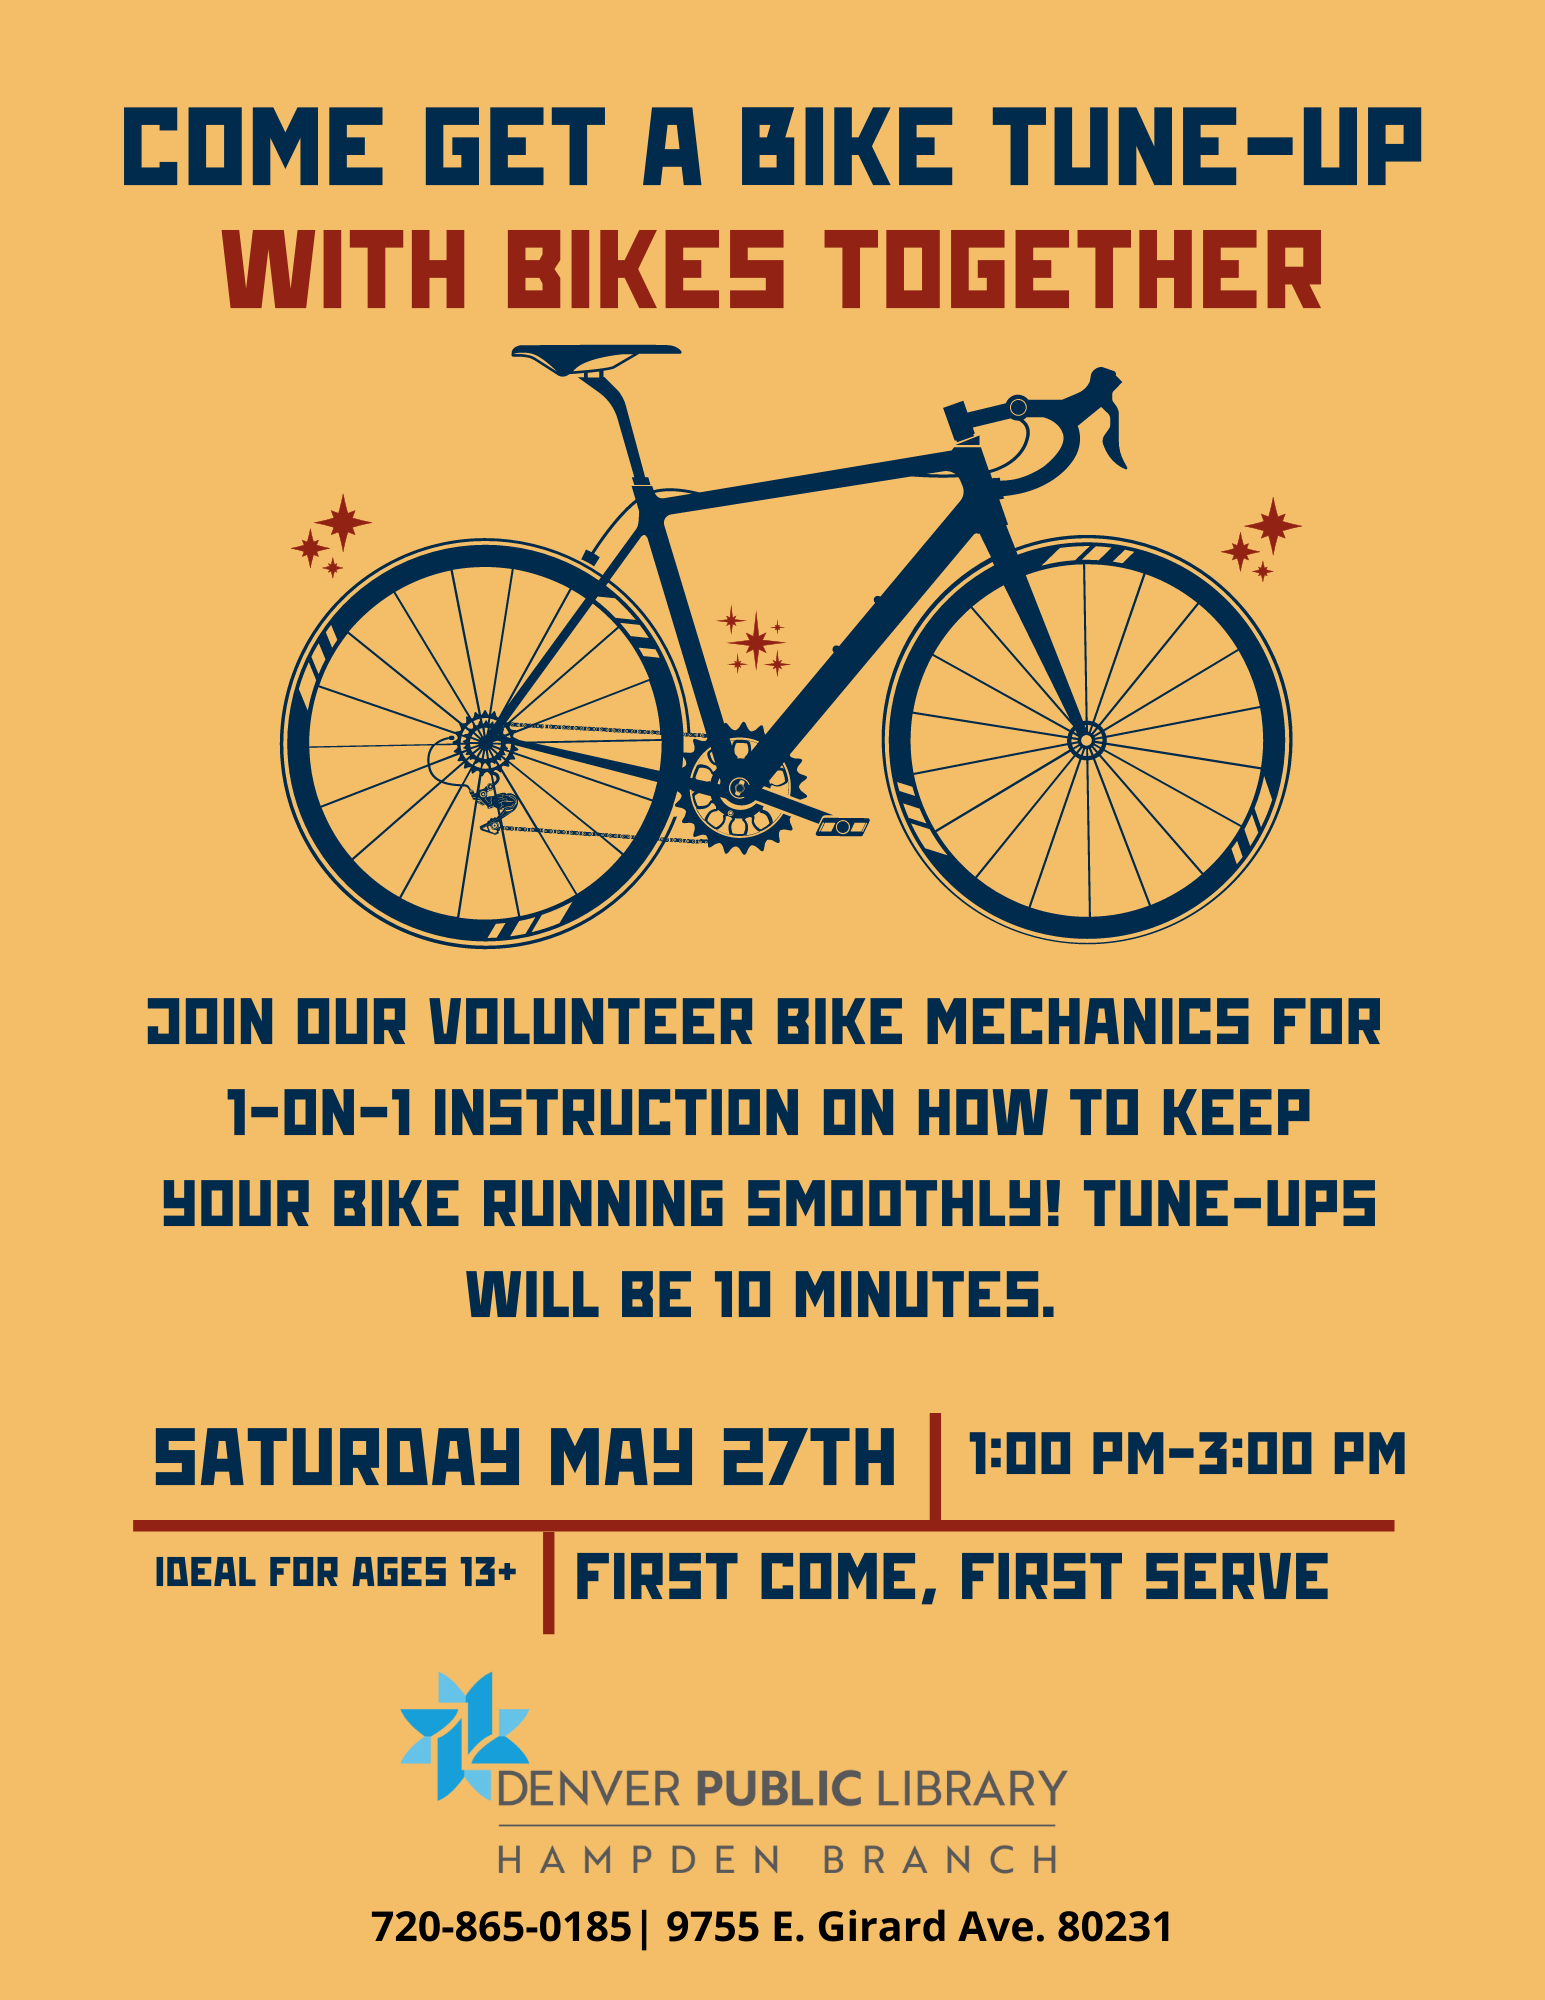 Free Bike Tune-Ups with Bikes Together | Denver Public Library